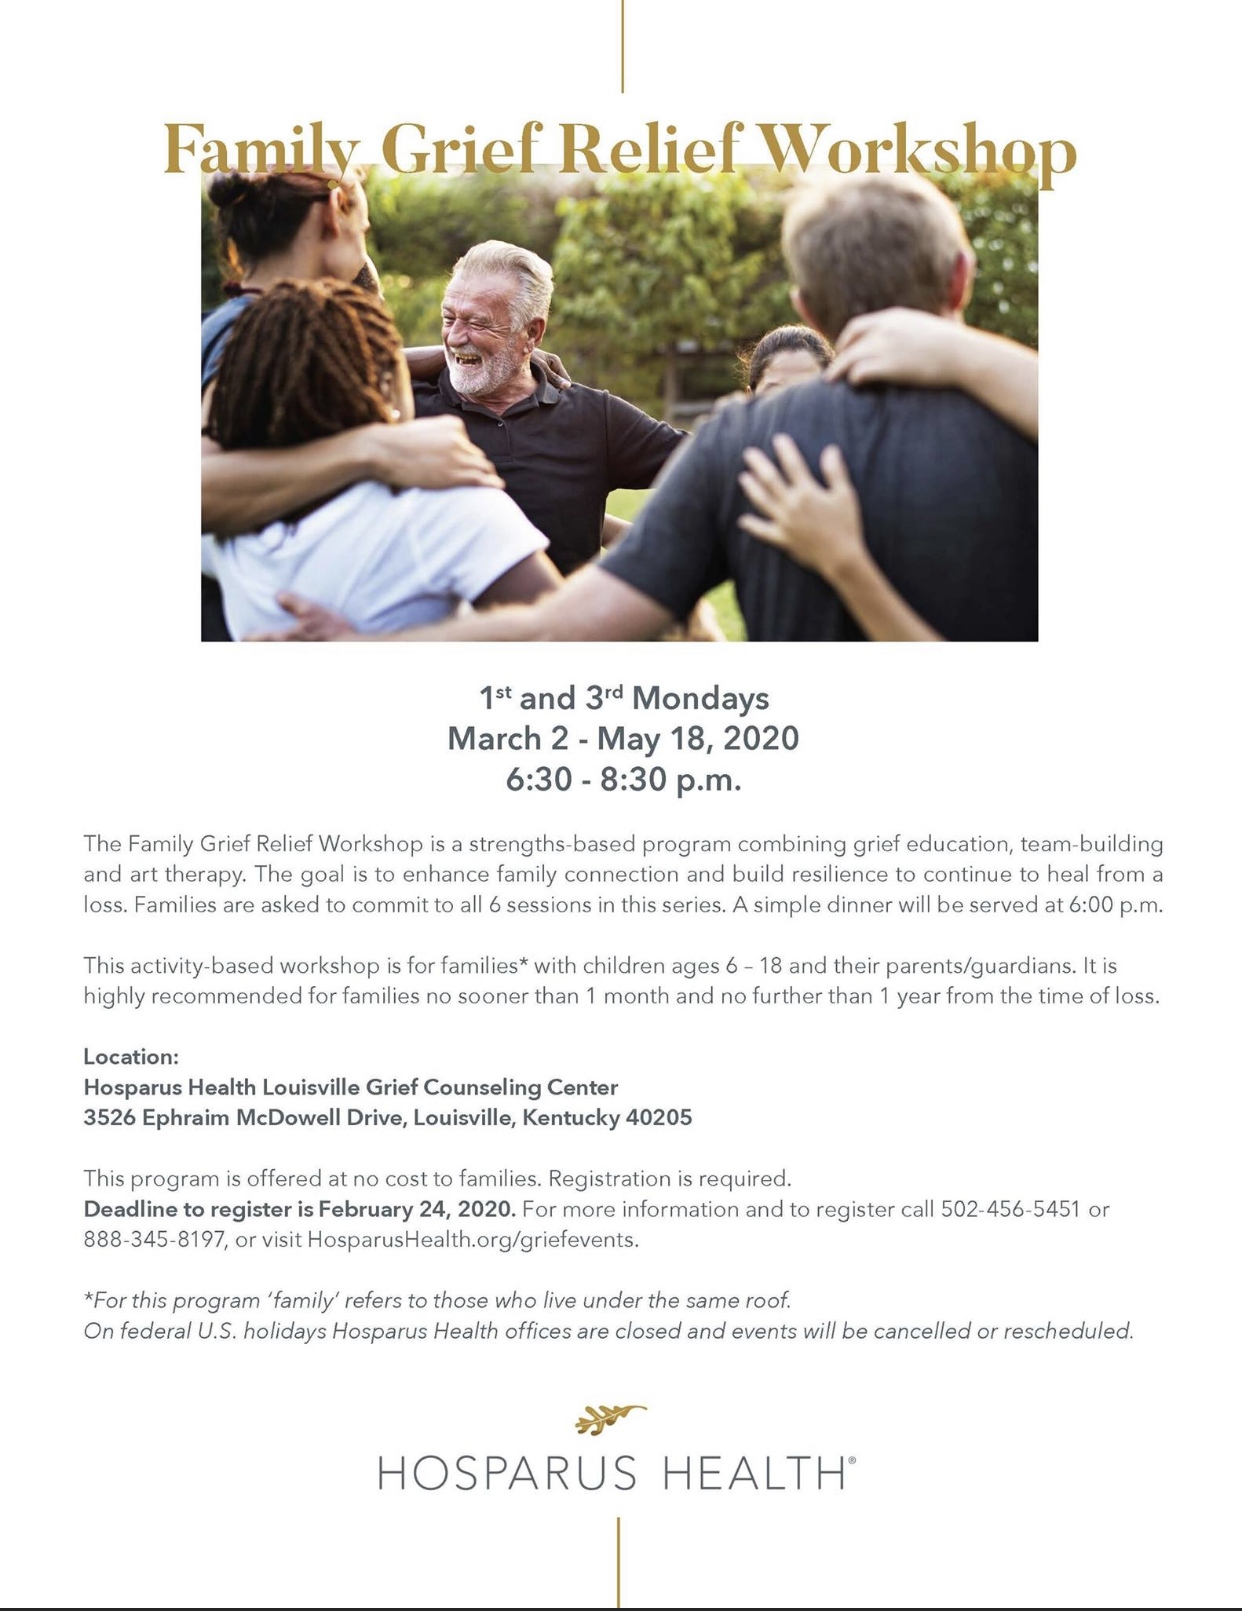 Family Grief Relief Workshop 2020